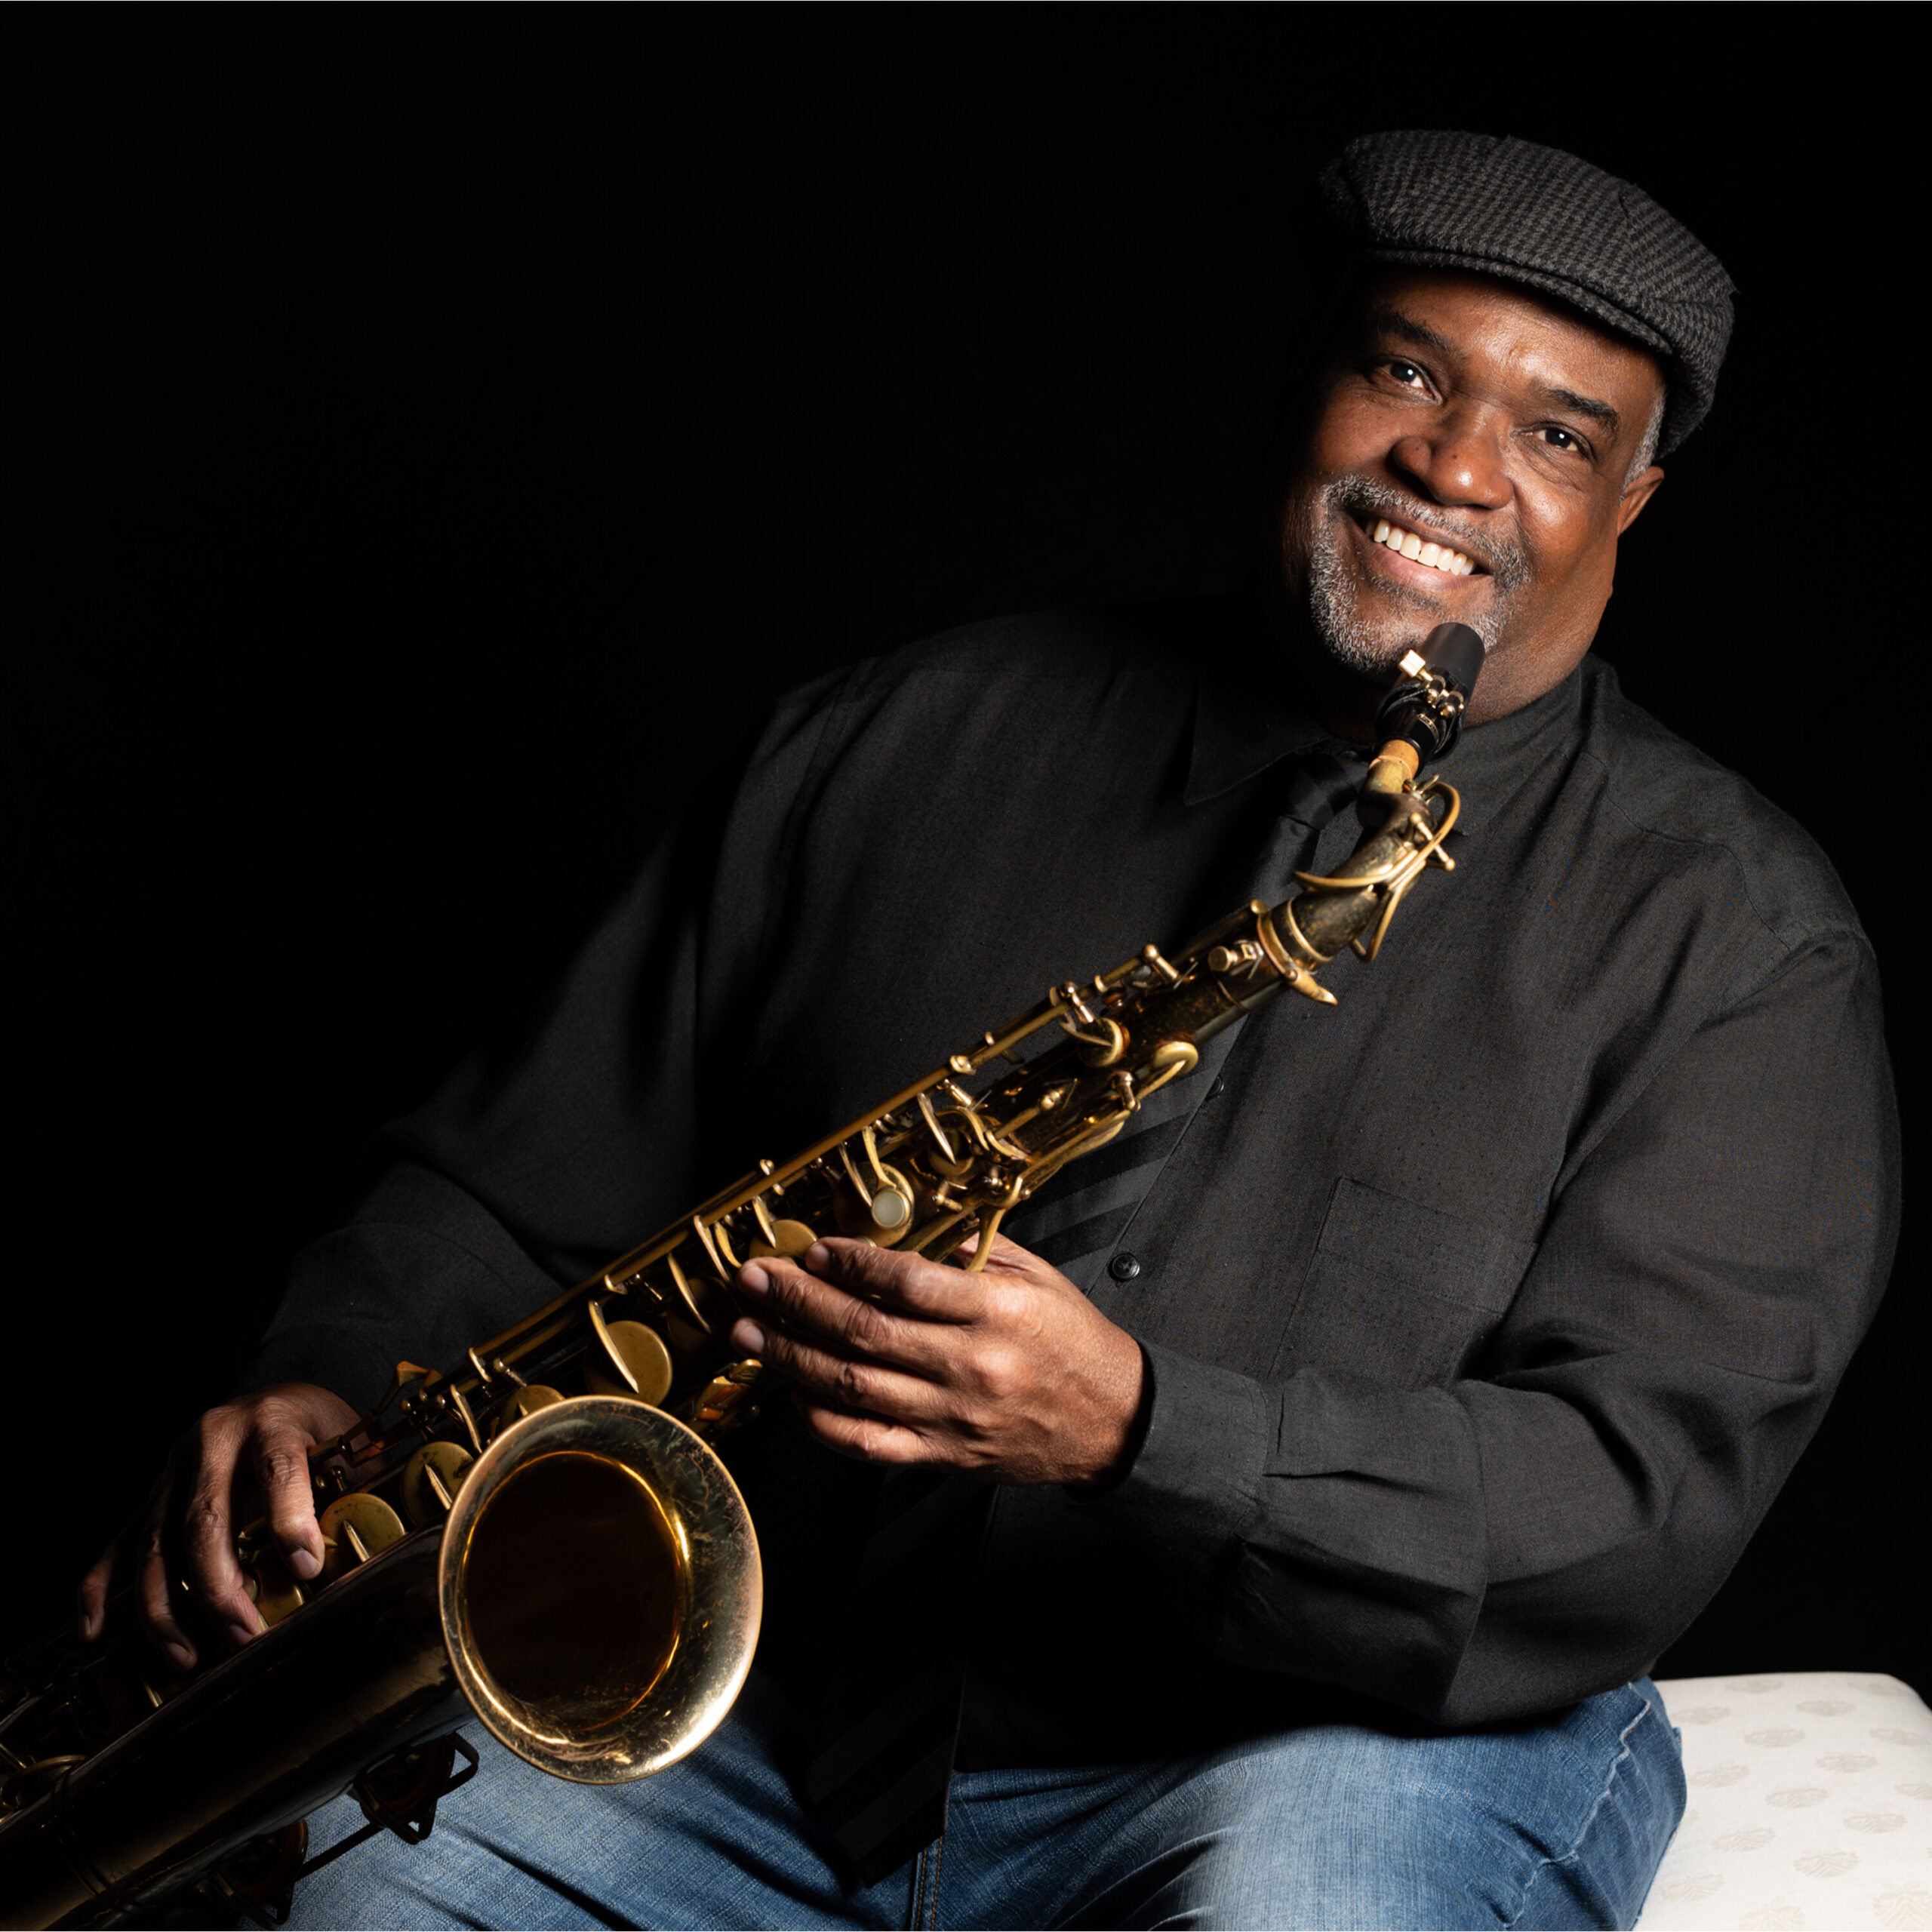 Renowned Jazz Saxophonist Derwin Daniels Releases New Single "Brighter Than This"